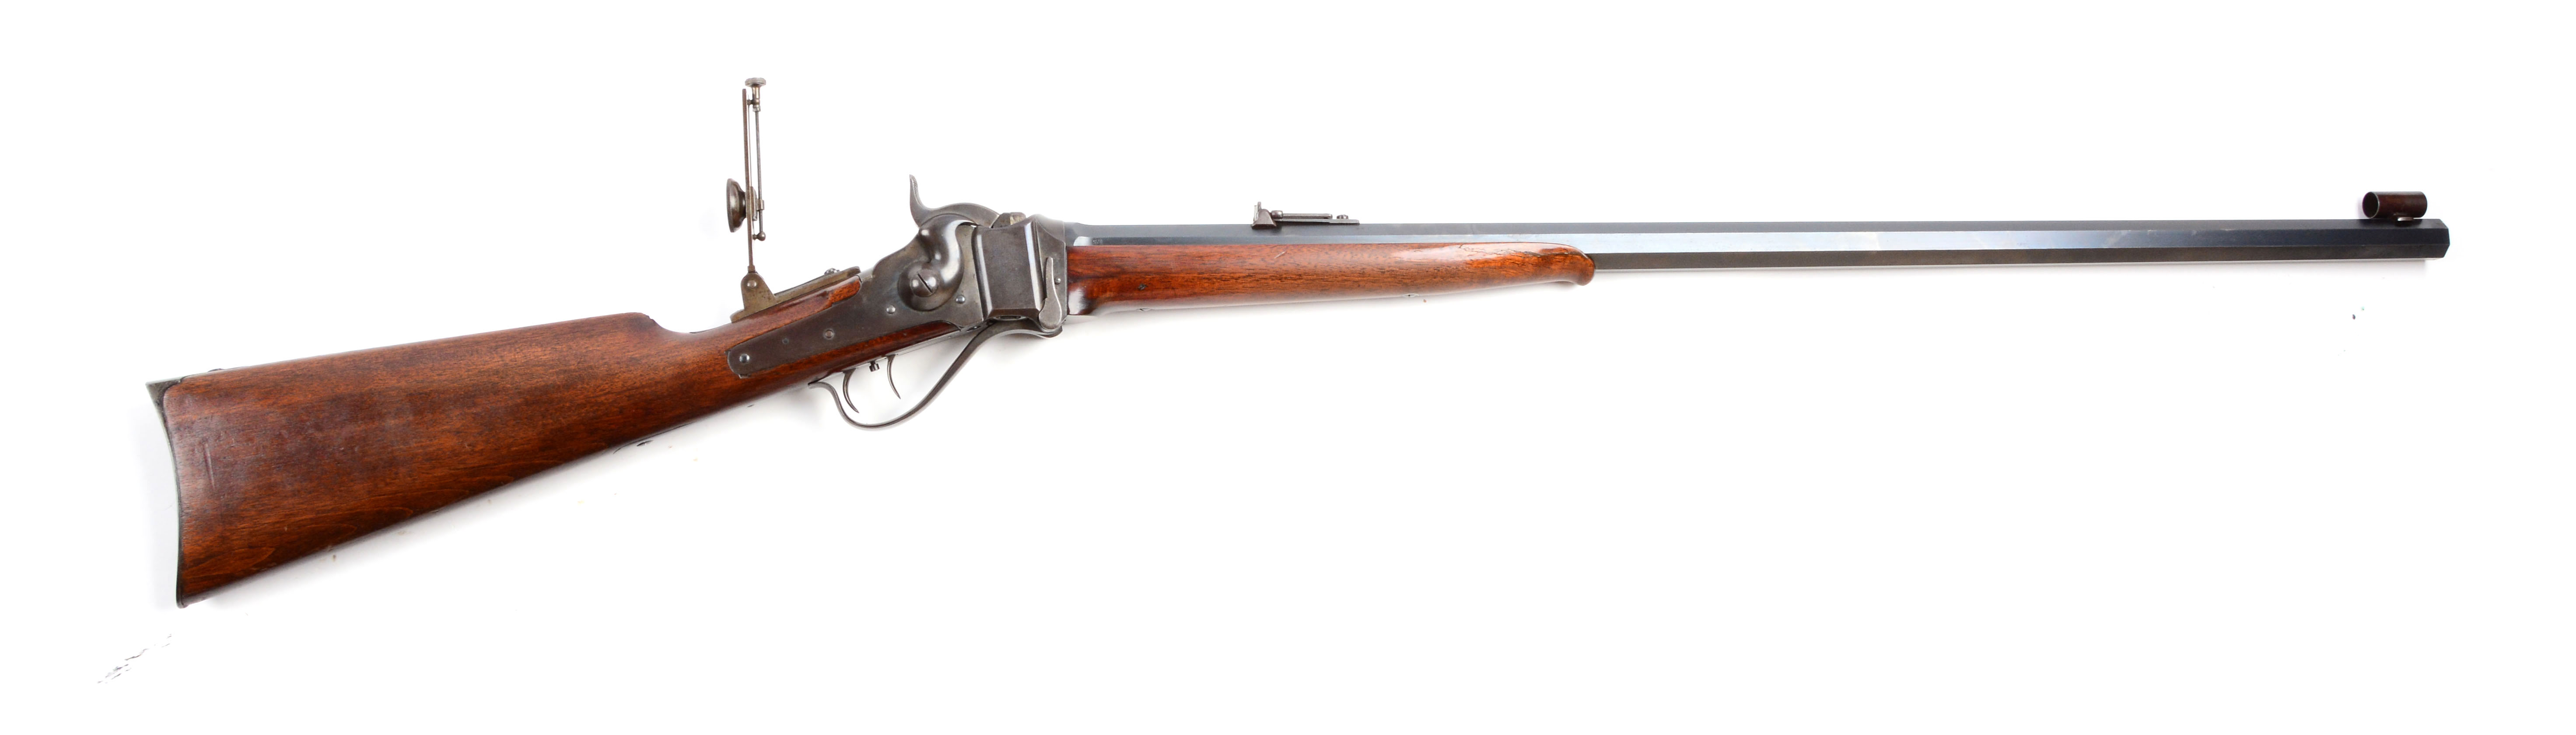 High Condition Sharps Model 1874 Special Order Sporting Rifle (Kittredge & Co.), estimated at $12,000-18,000.